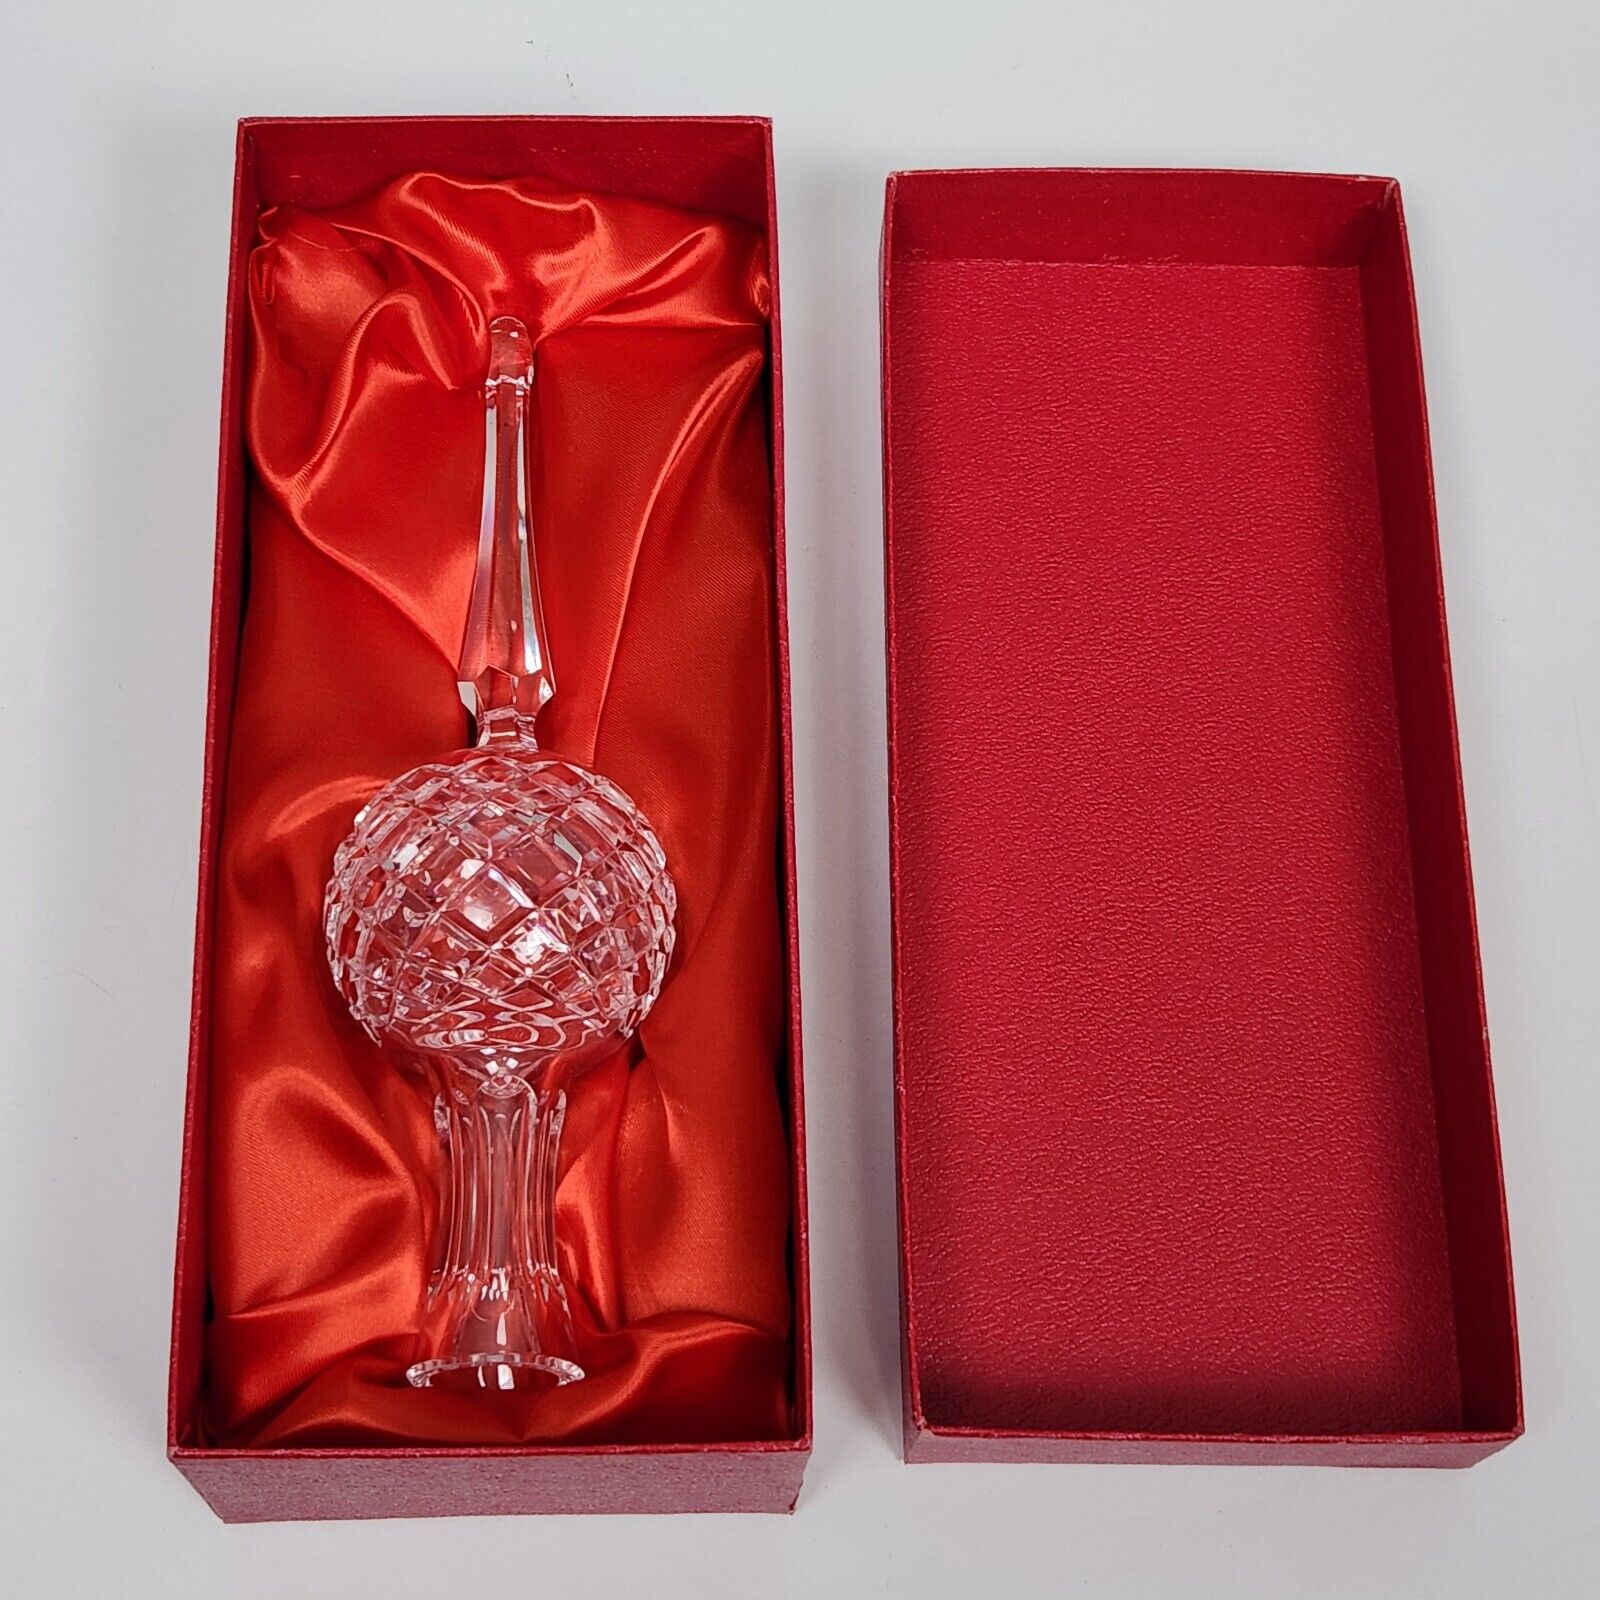 WATERFORD Crystal Glass Christmas Tree Topper Original Box